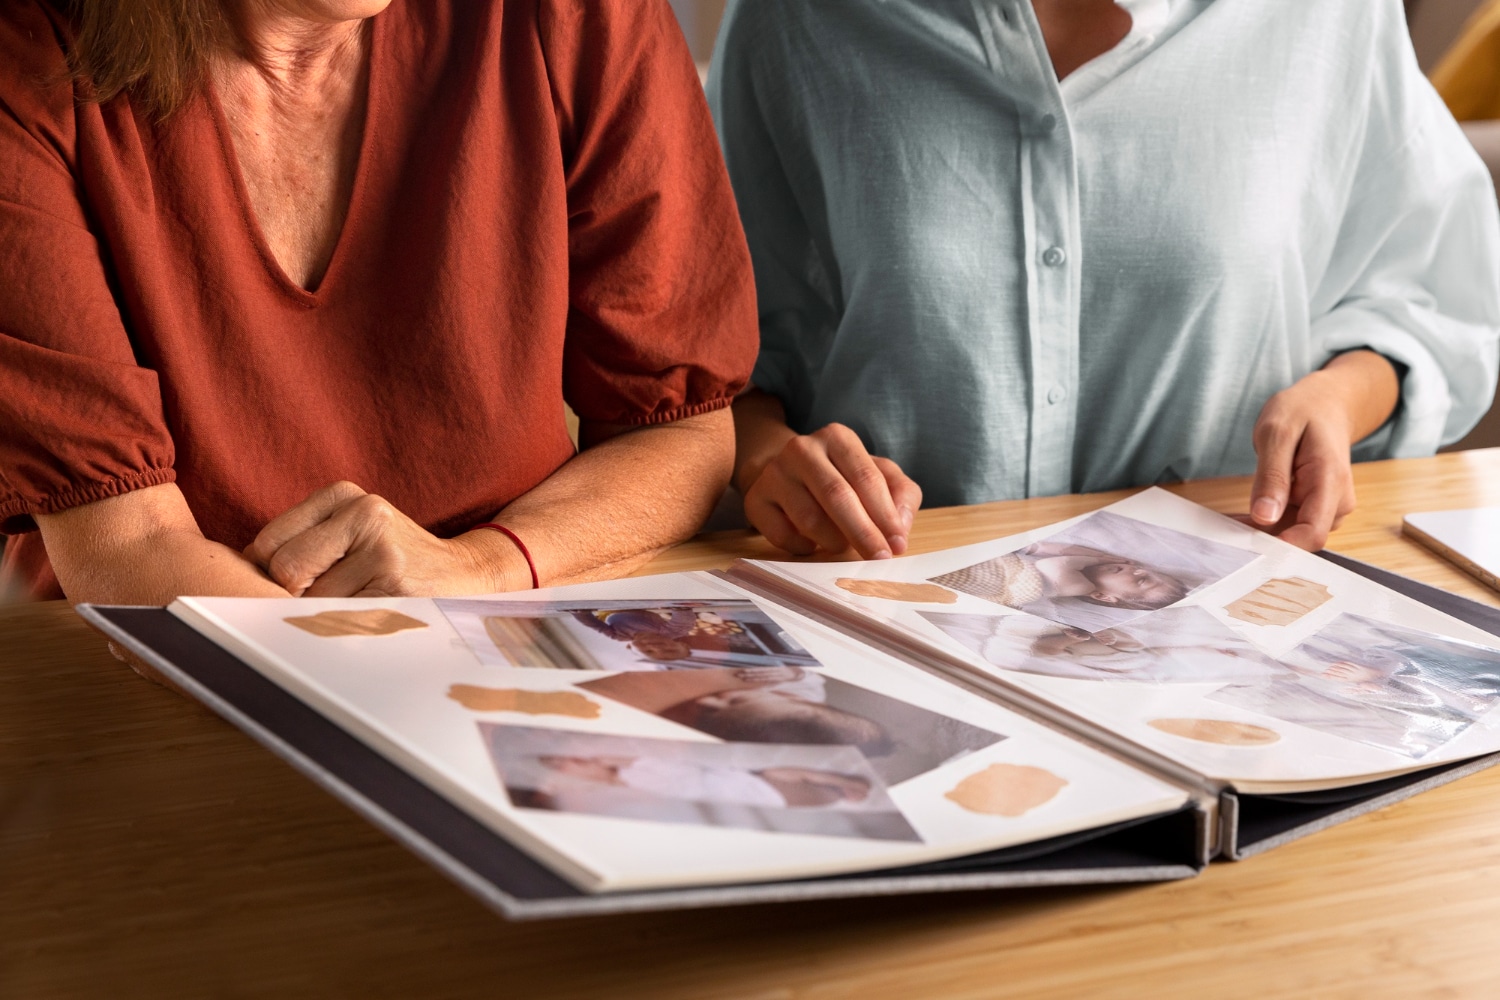 Preserve Your Memories With Chatbooks’s Easy Photo Book Creation